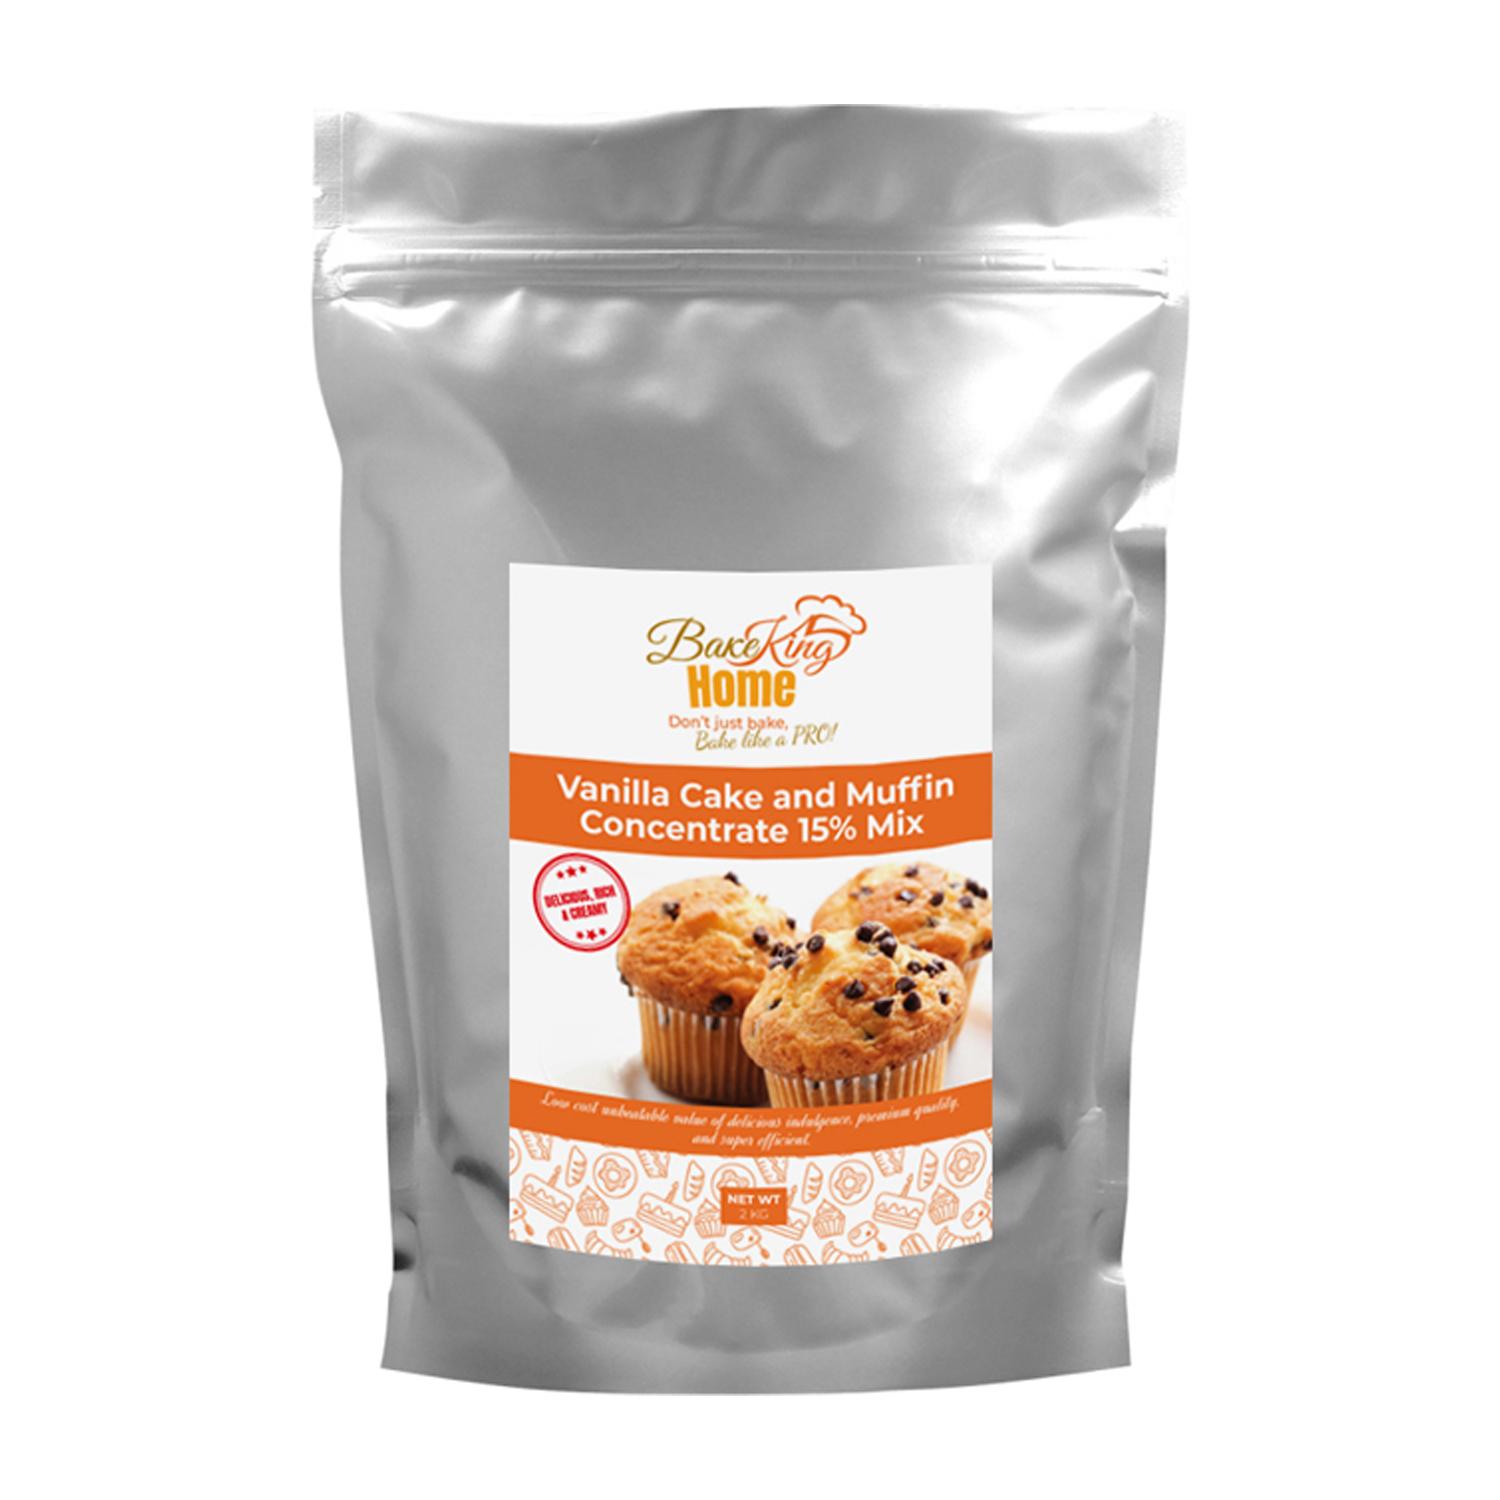 BAKEKING VANILLA CAKE AND MUFFIN CONCENTRATE 2KG